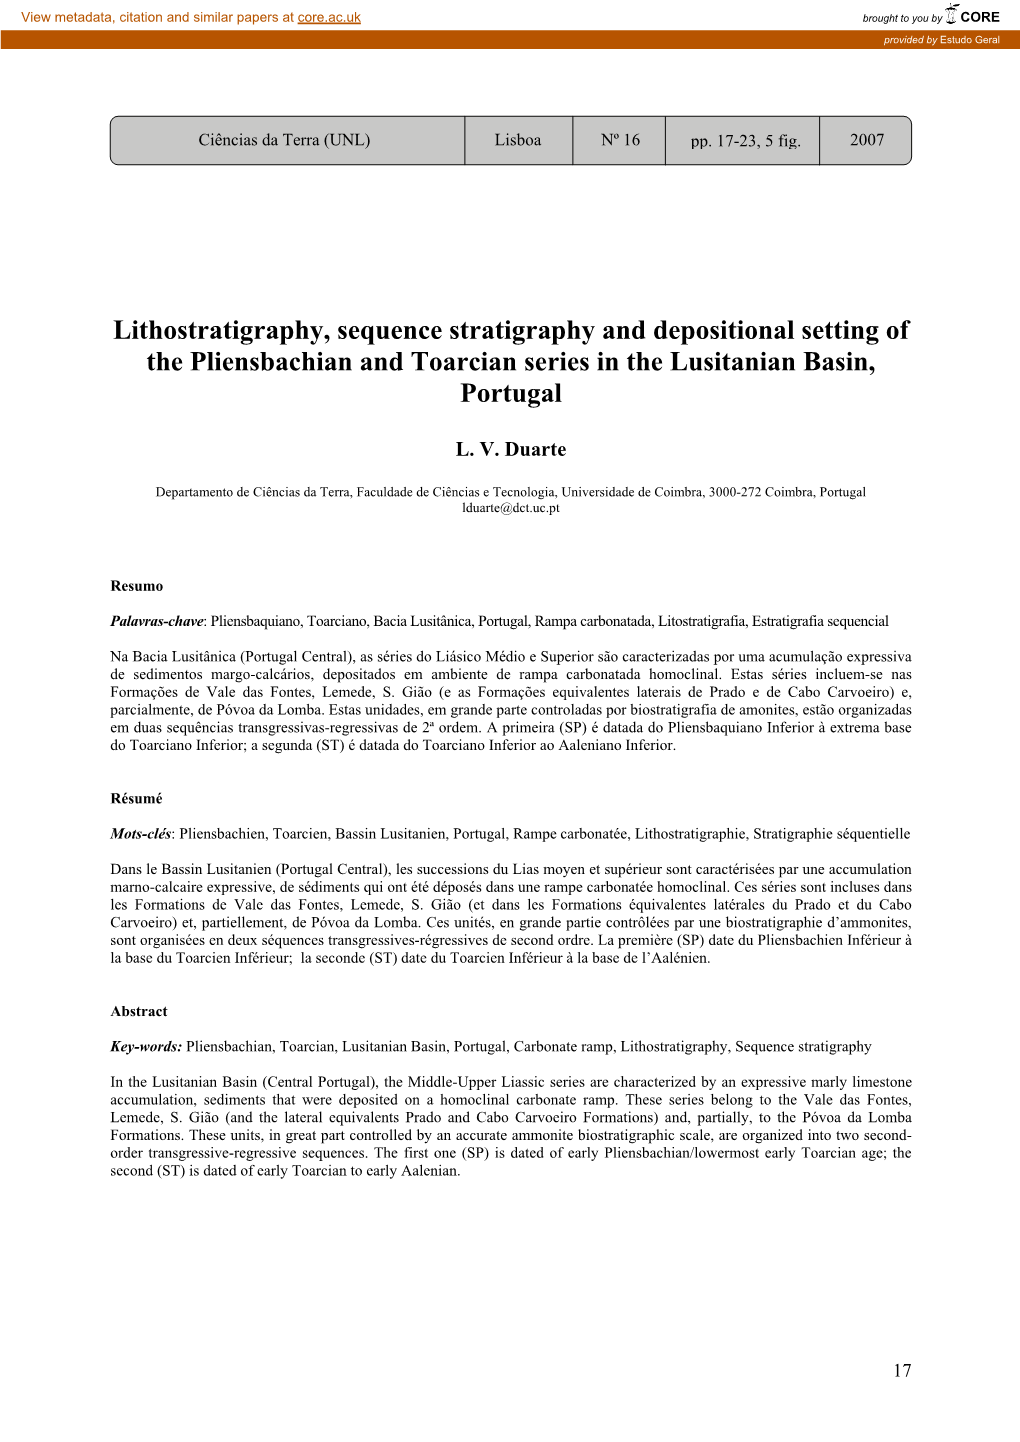 Lithostratigraphy, Sequence Stratigraphy and Depositional Setting of the Pliensbachian and Toarcian Series in the Lusitanian Basin, Portugal